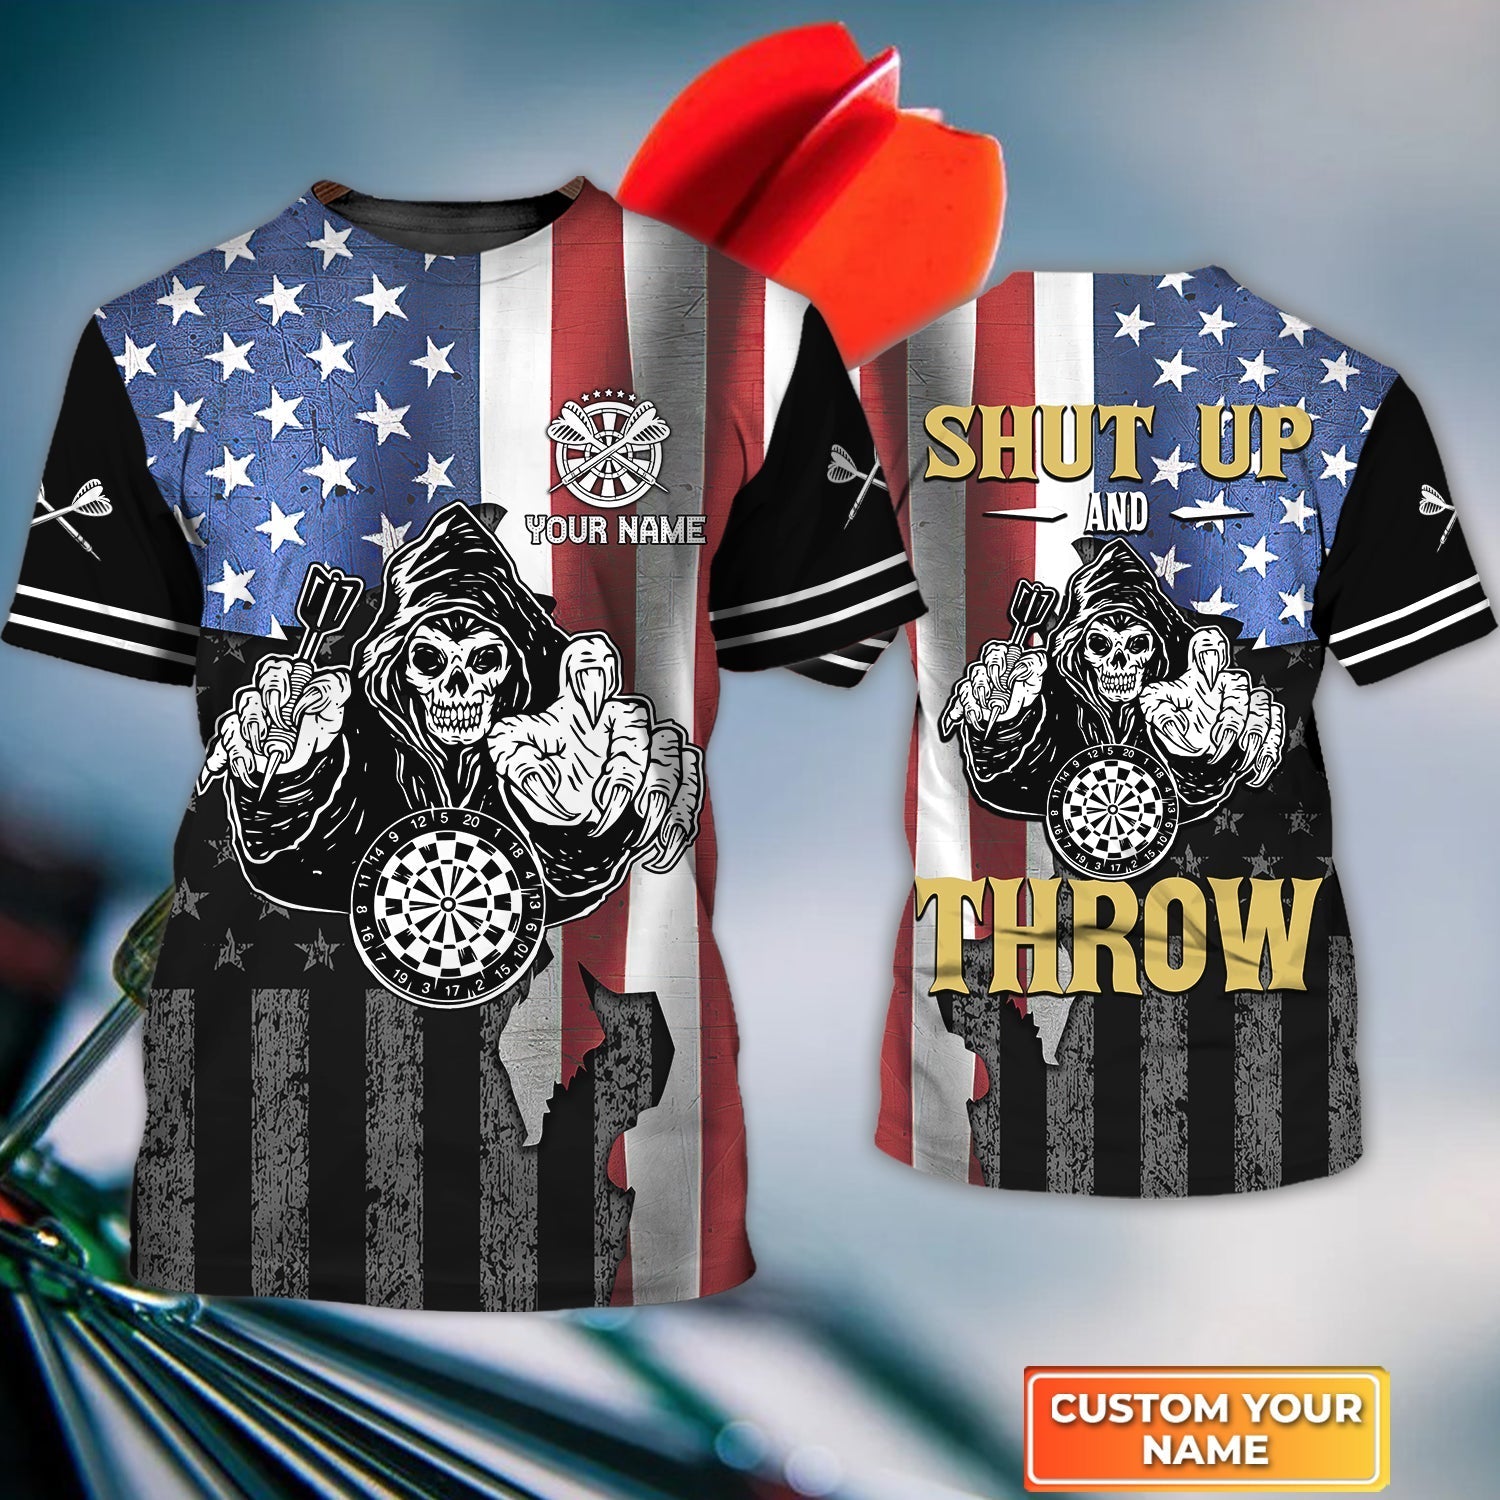 Put Me Down For 100 Personalized Name 3D Tshirt, gift For Darts Player – DT112